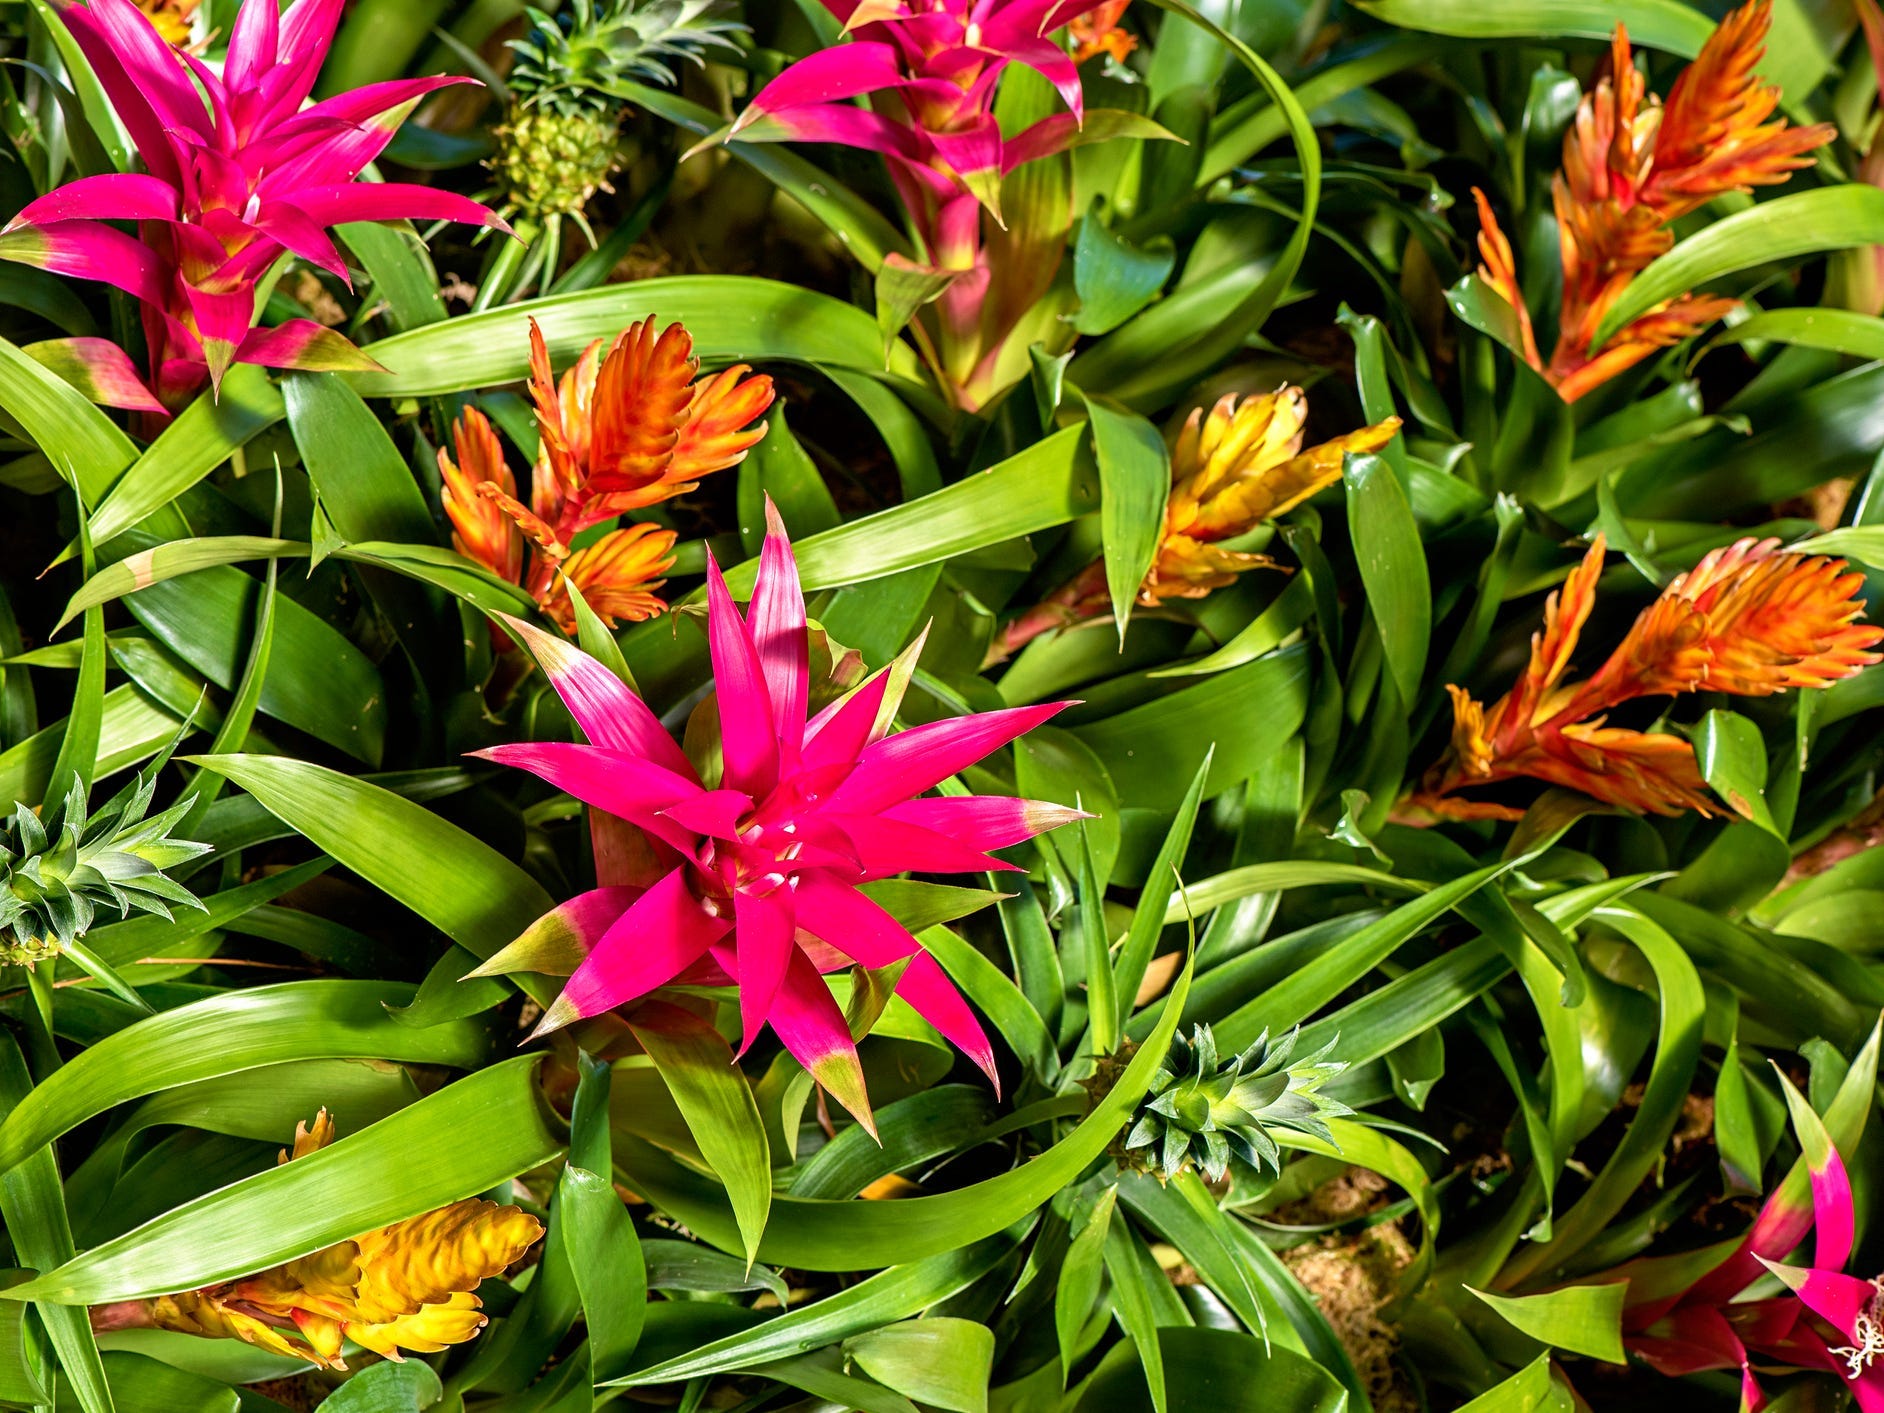 Close-up of brightly colored bromeliad plants.